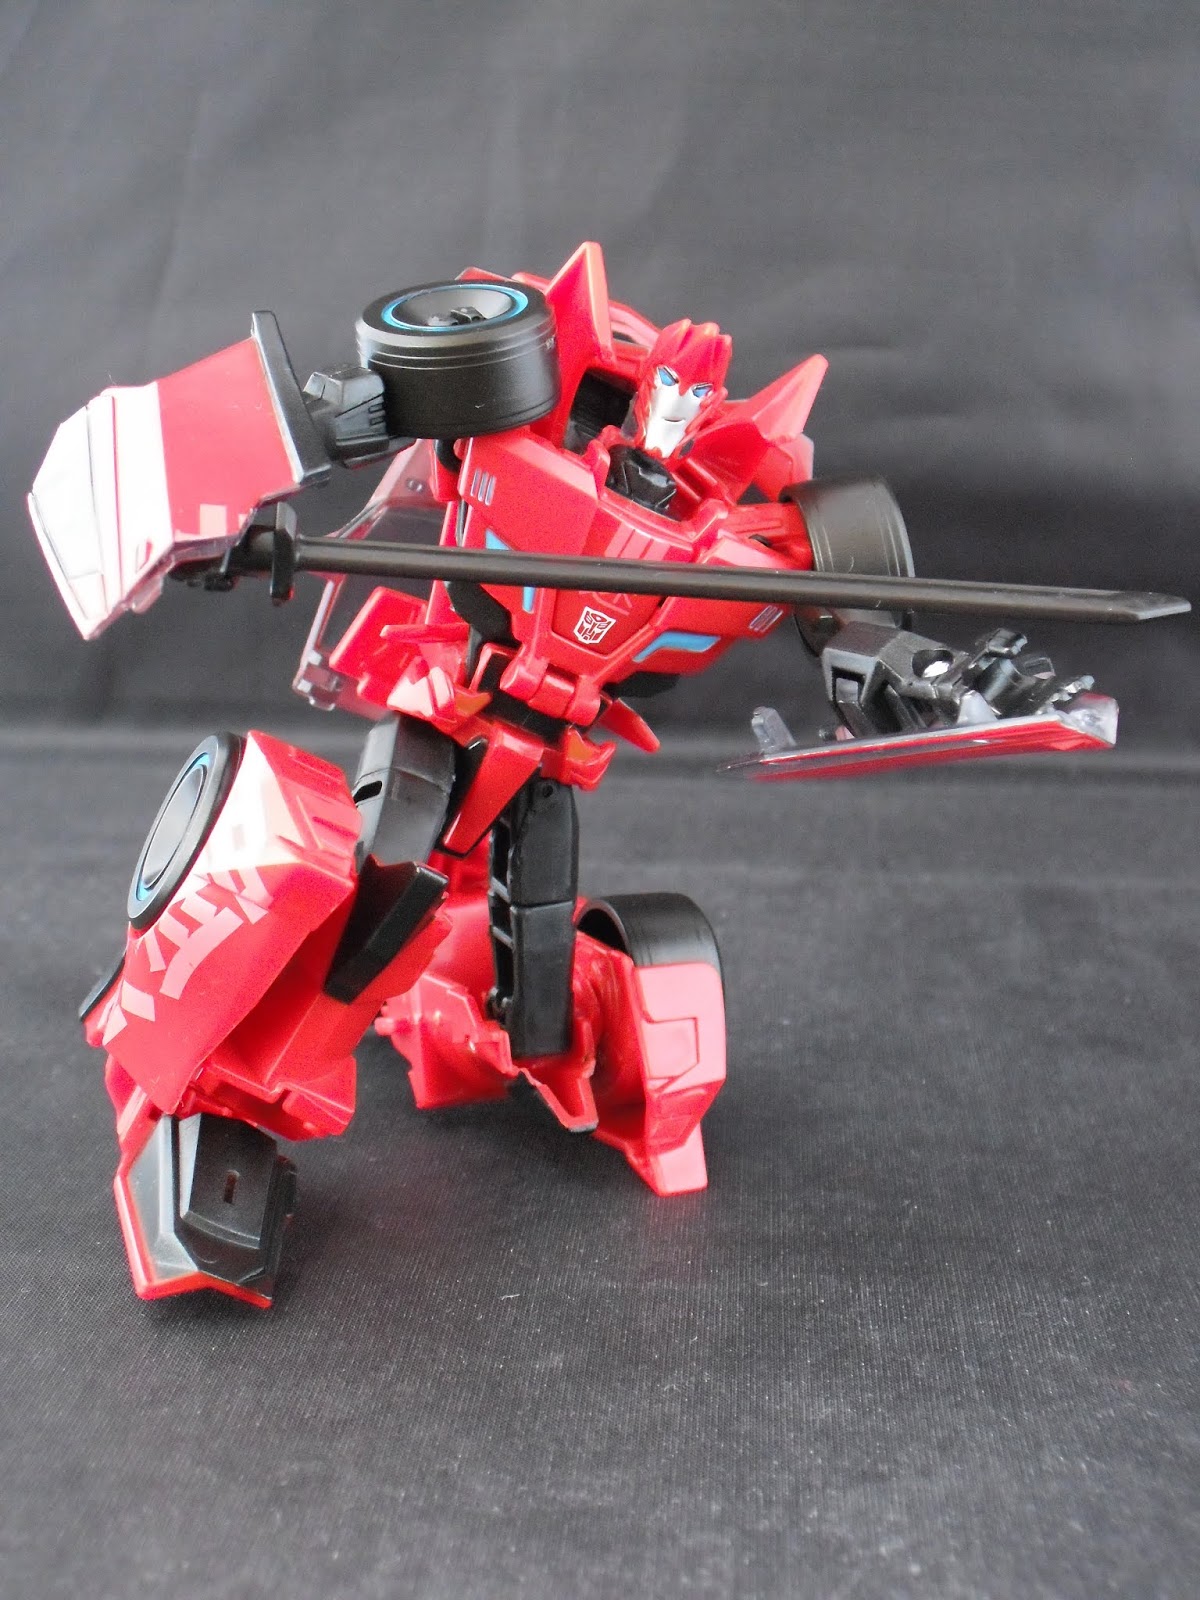 MENGBADI Red Comet Powerglide Commander Level Classical Plastic Robot Toy Car